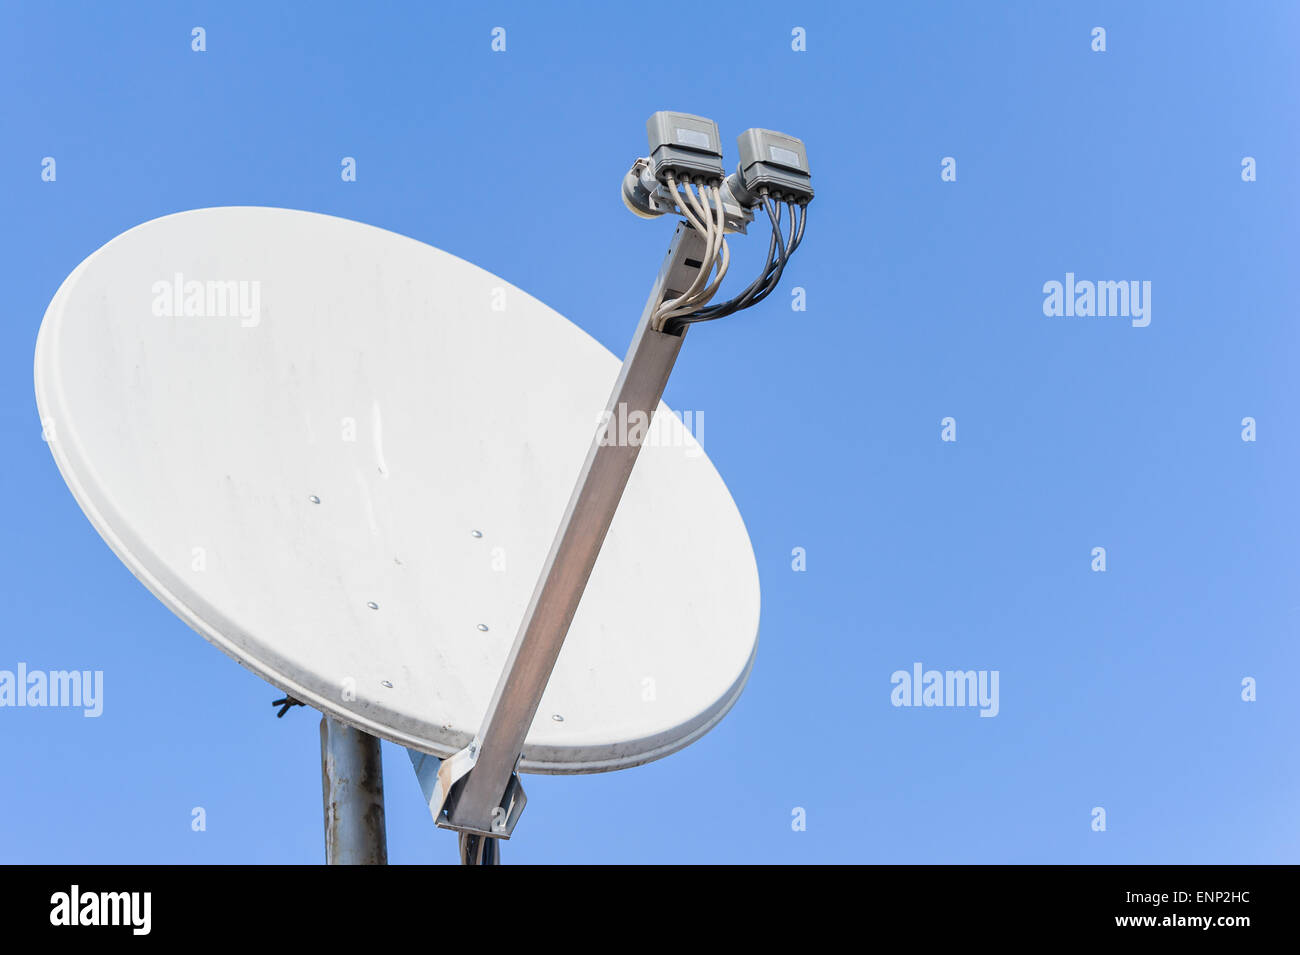 Satellite dish the background of a blue sky Stock Photo